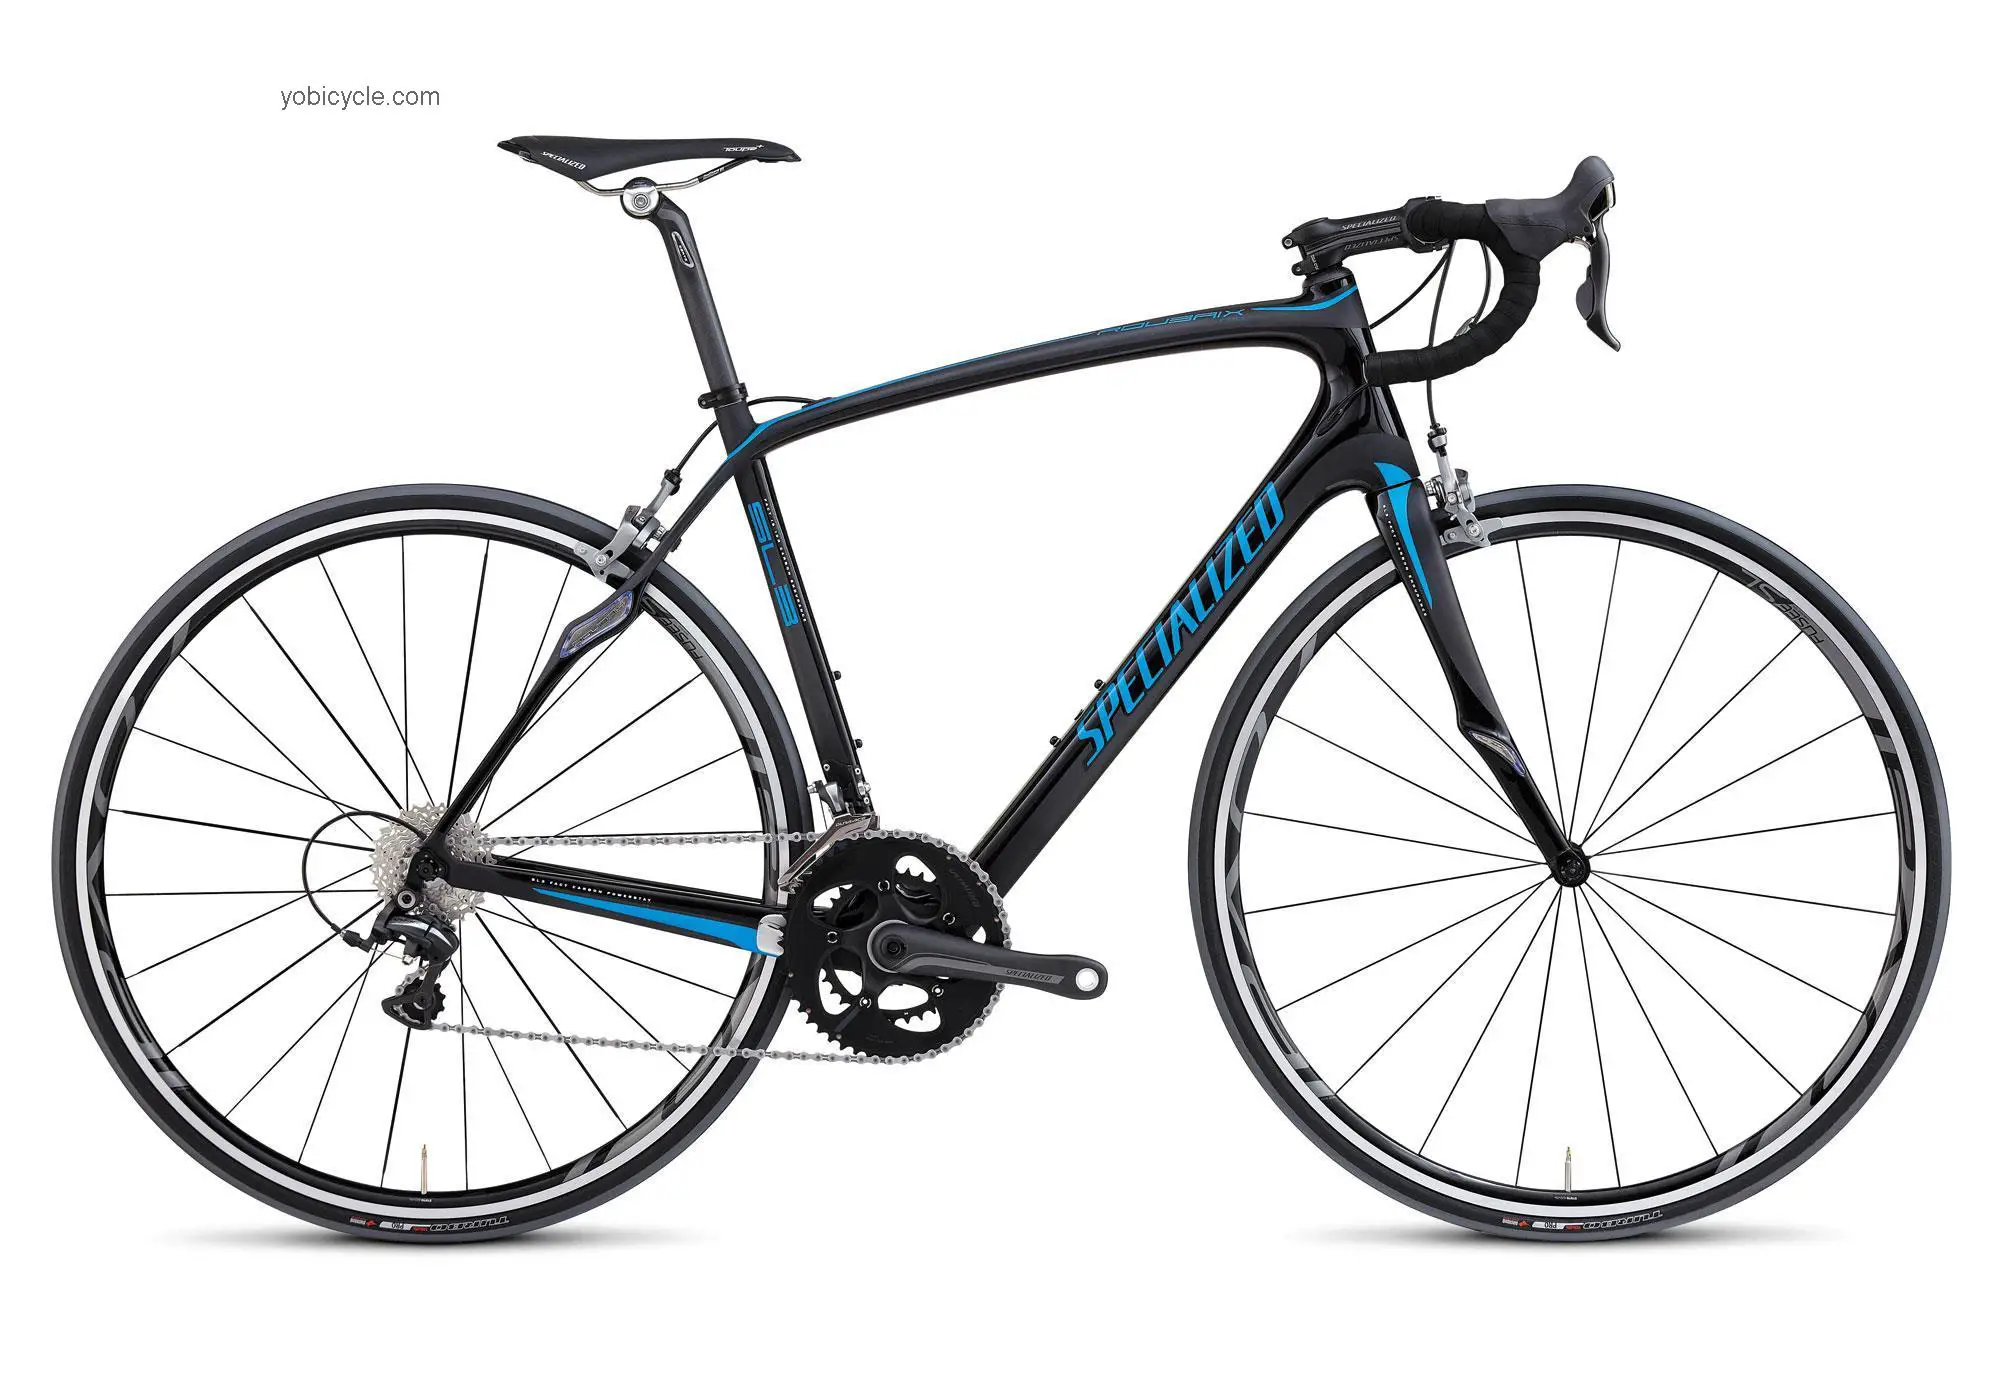 Specialized Roubaix SL3 Pro Compact Dura-Ace competitors and comparison tool online specs and performance